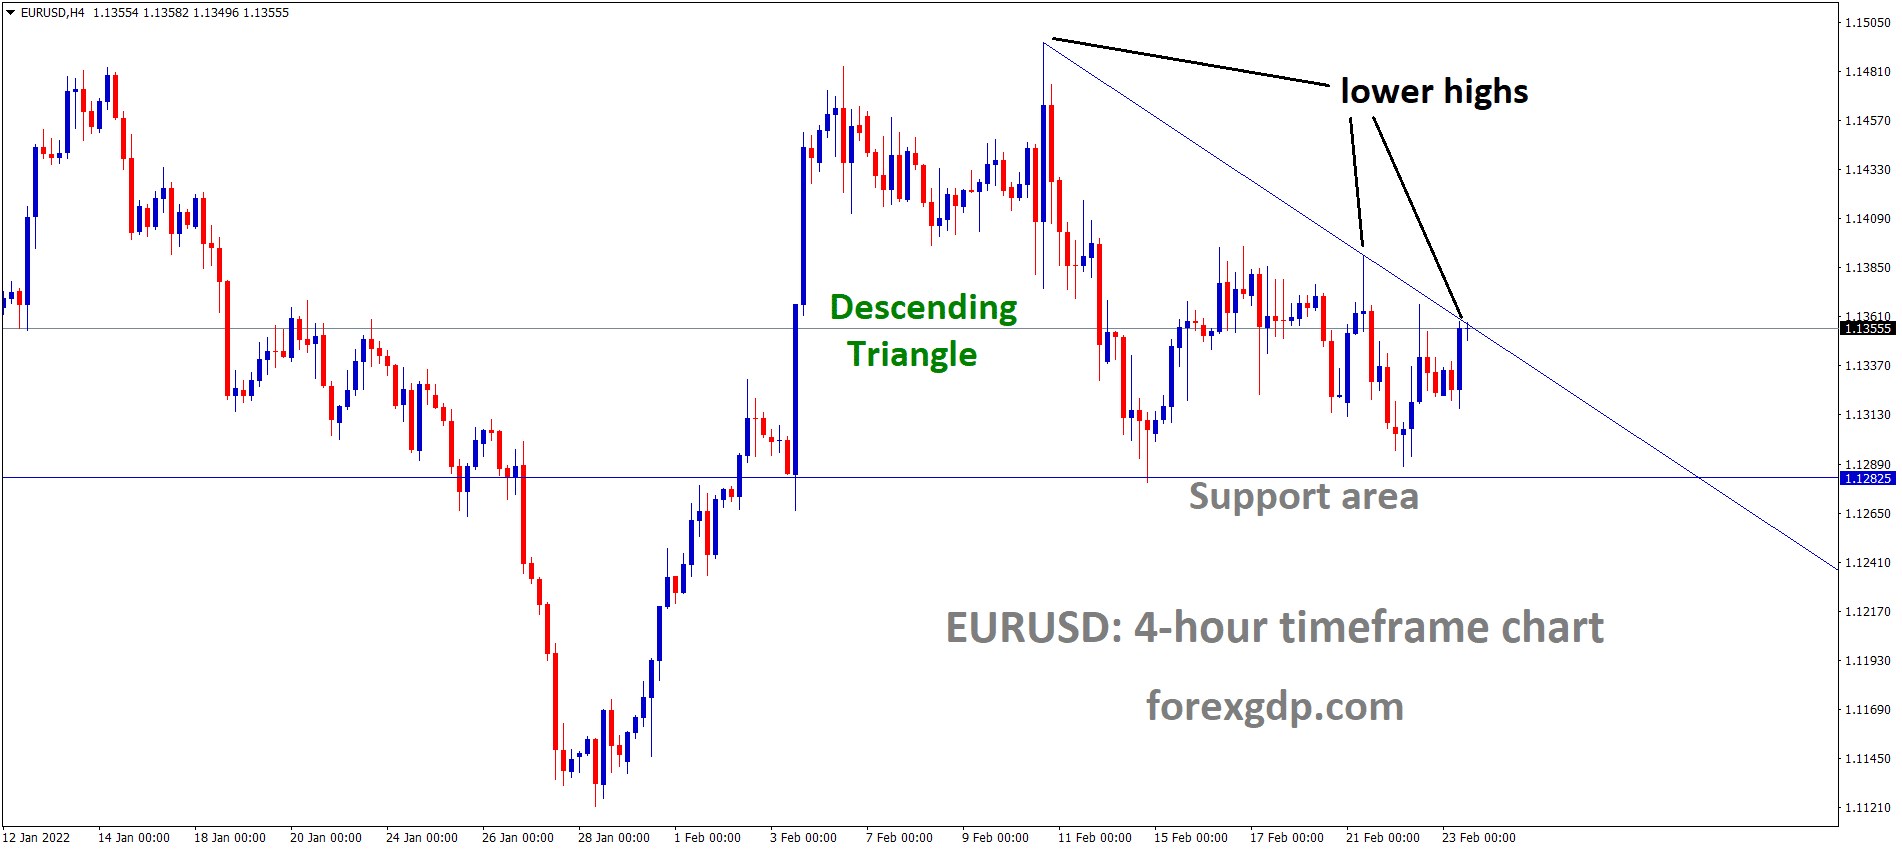 EURUSD is moving in a descending triangle pattern and the market has reached the lower high area of the pattern.